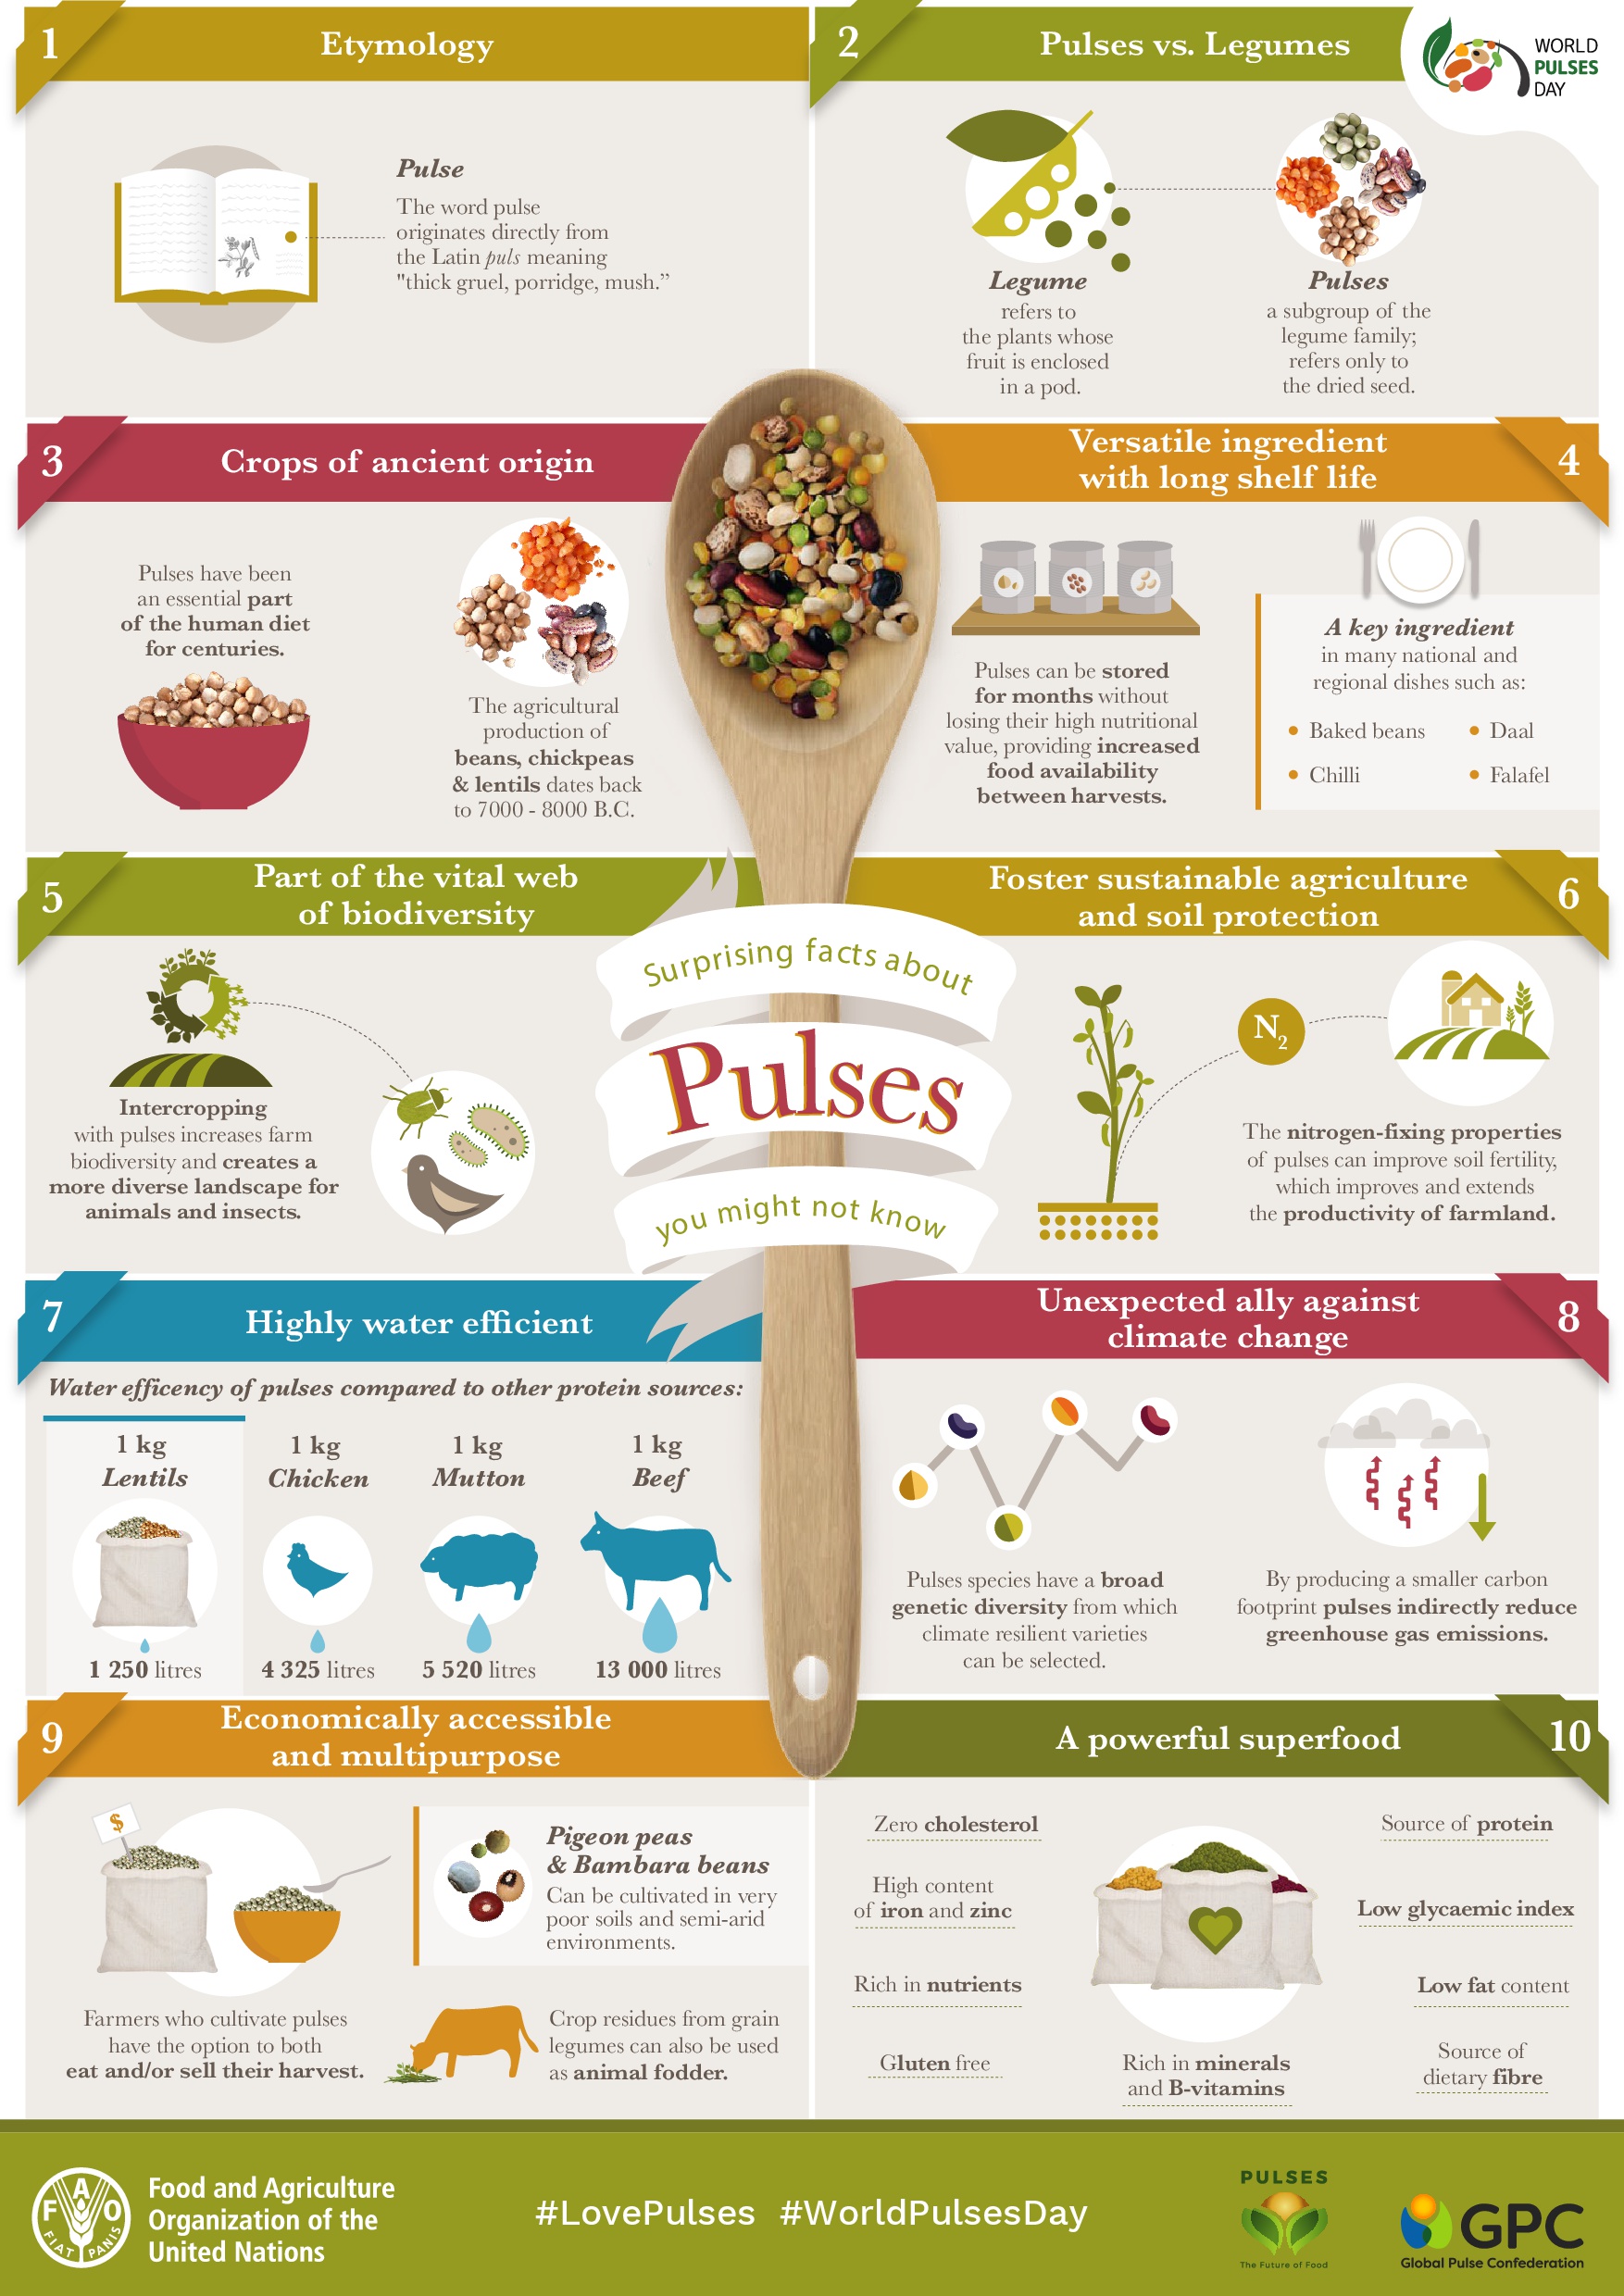 Surprising-Facts-about-Pulses